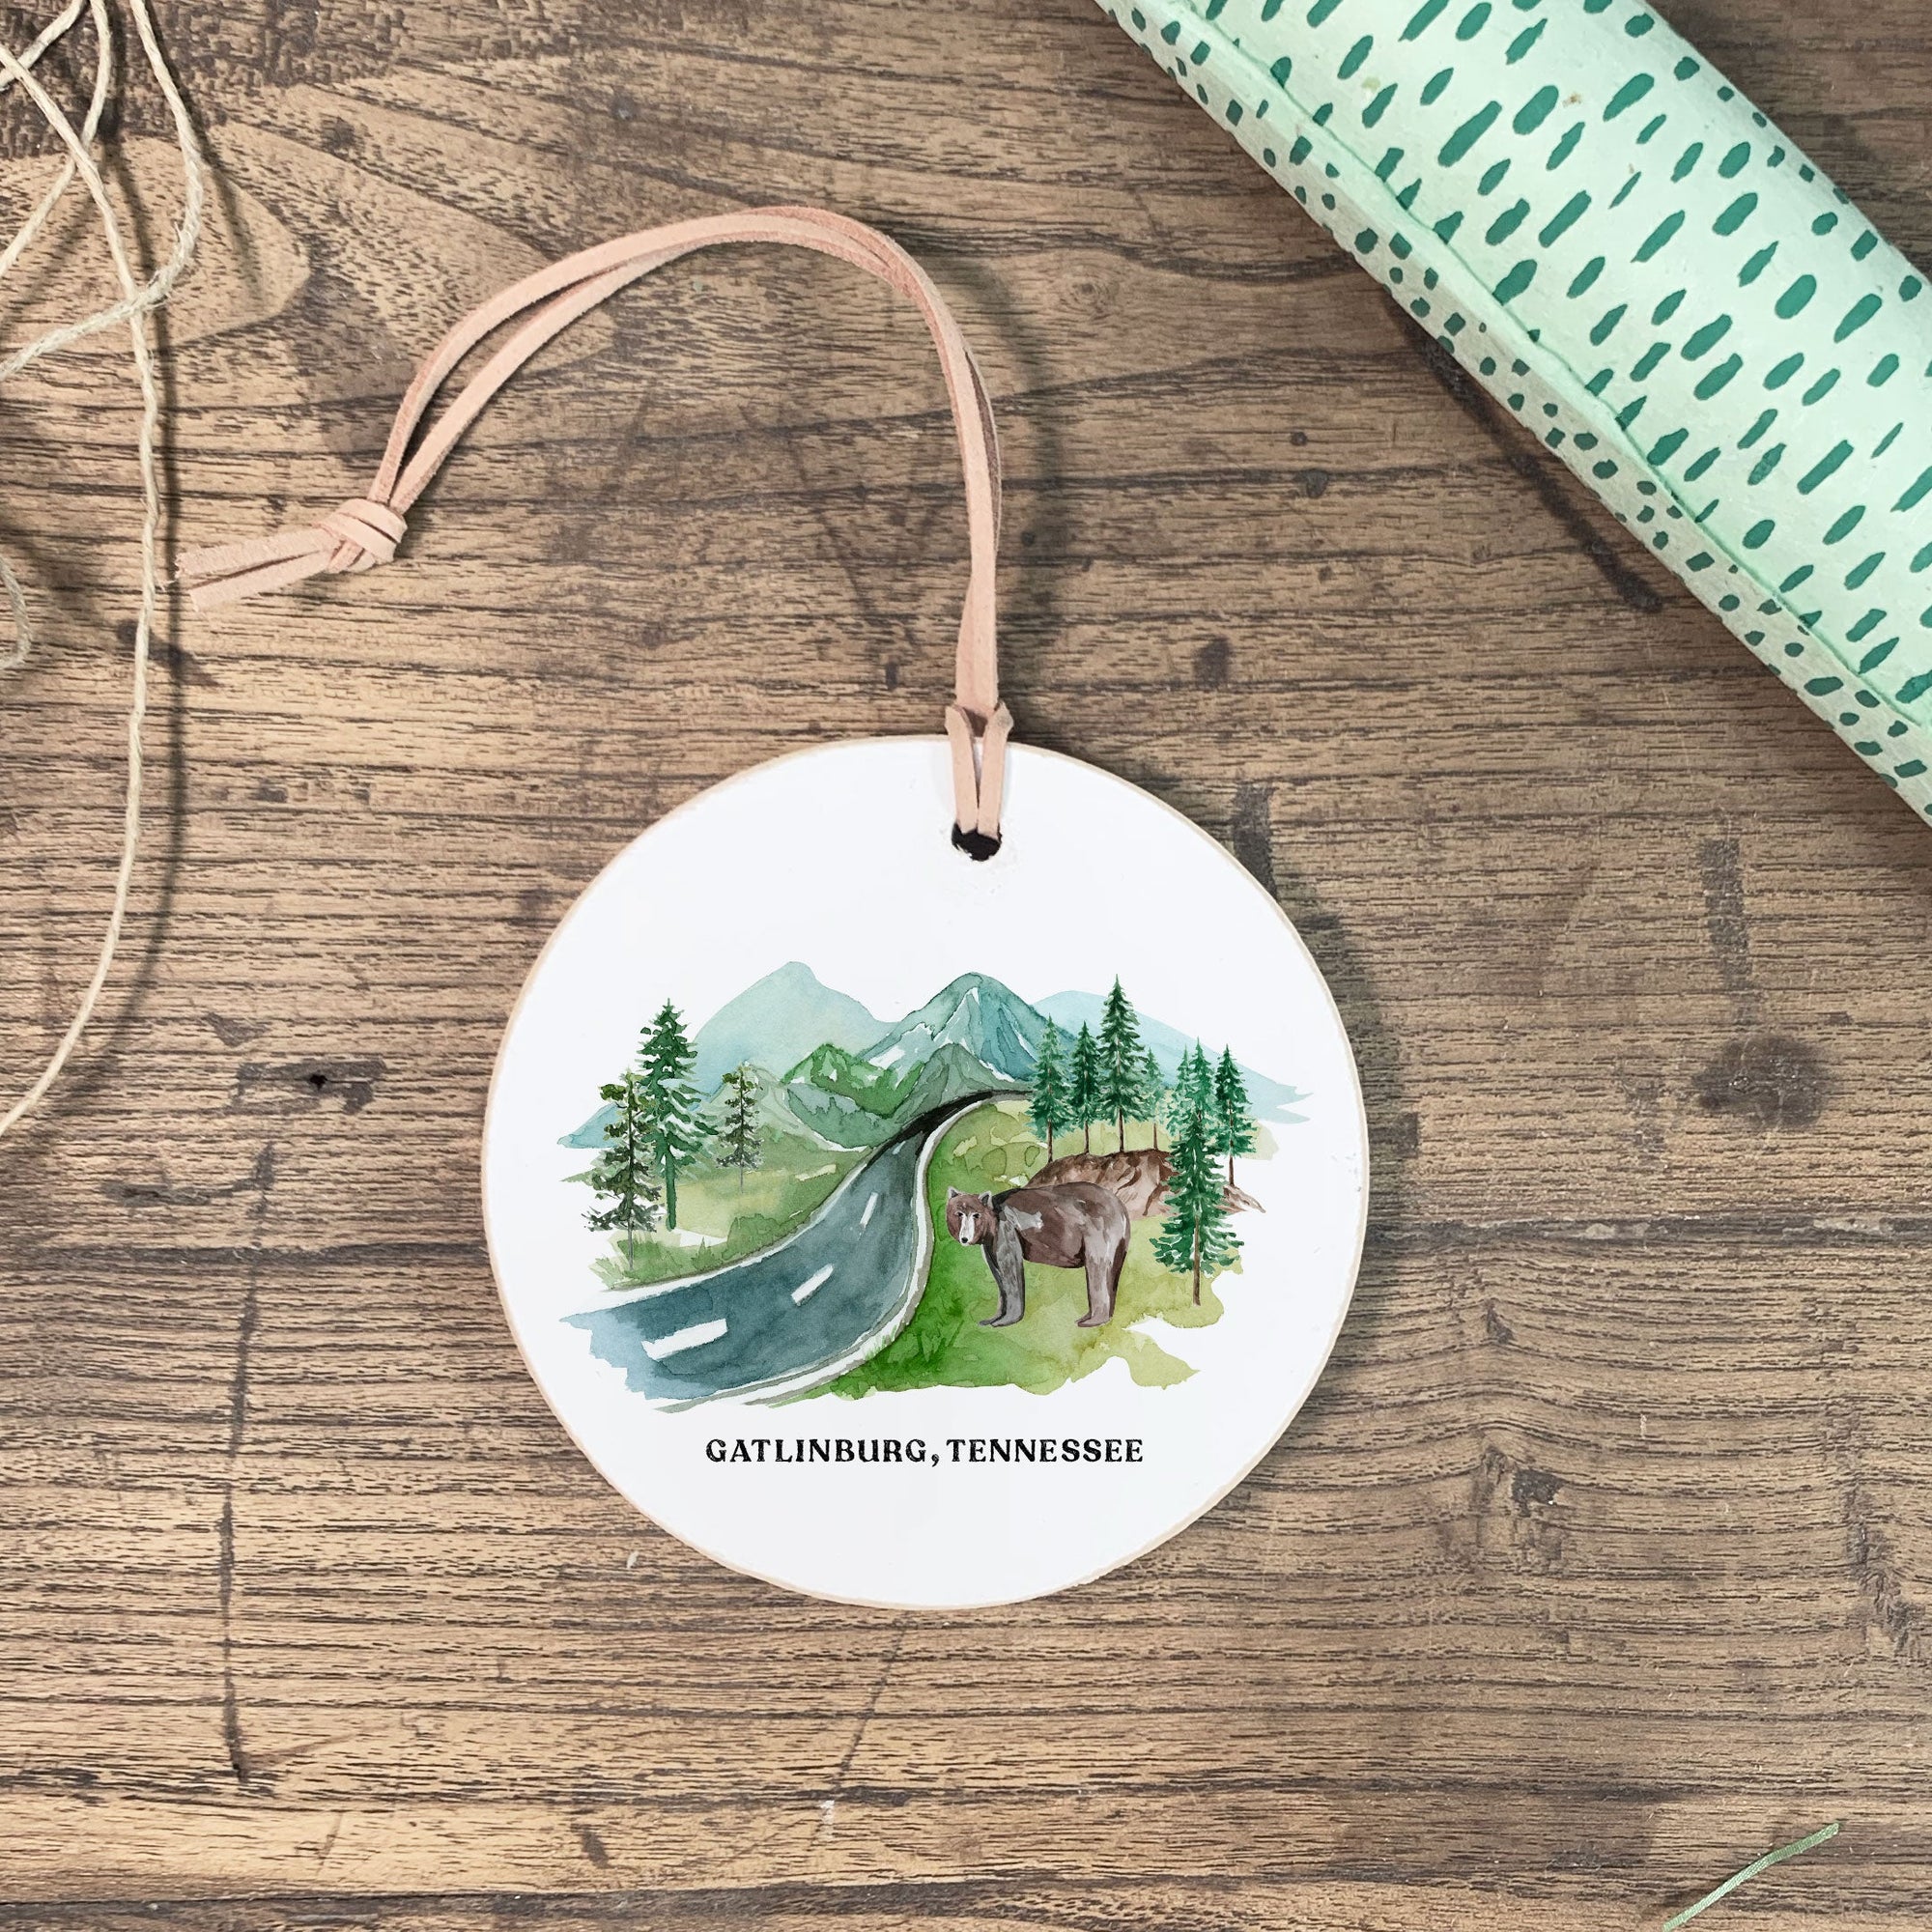 Front View. Customizable Ornament | Mountain Holiday Ornaments The WAREHOUSE Studio 